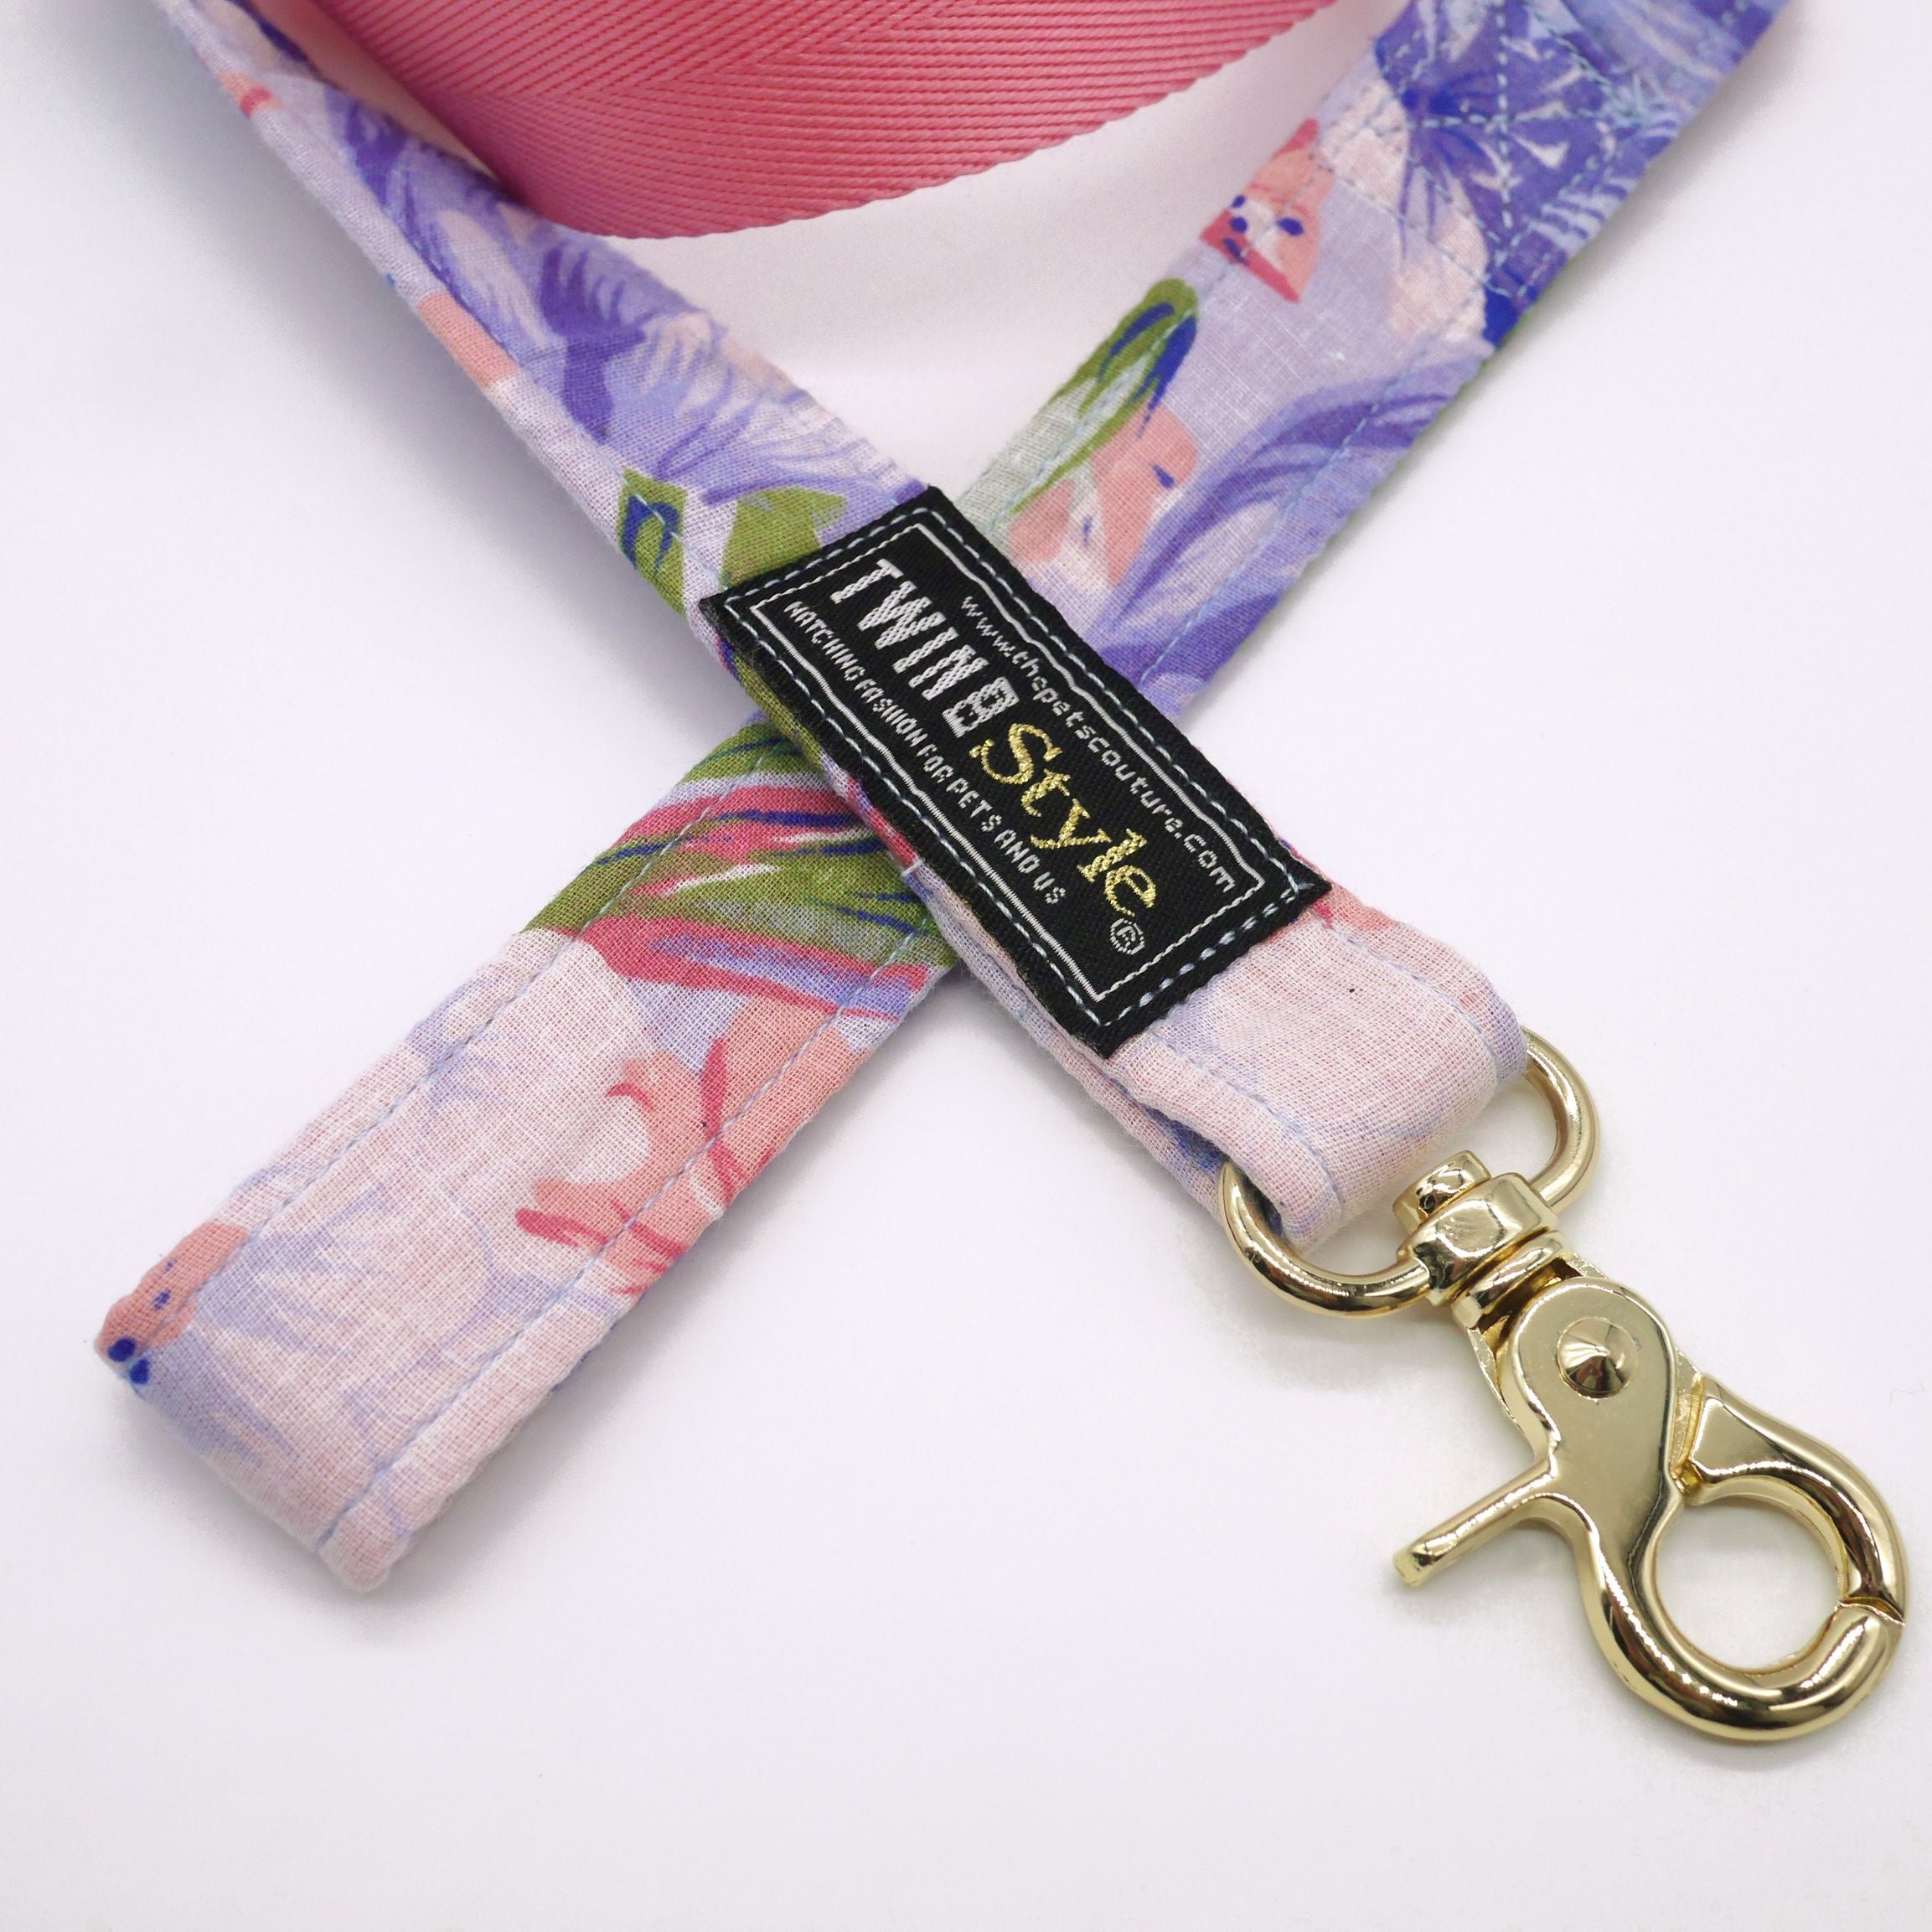 Tropical Fauna Pink Harness with Detachable Skirt + Leash Set - Twin In Style (For Her) - The Pet's Couture